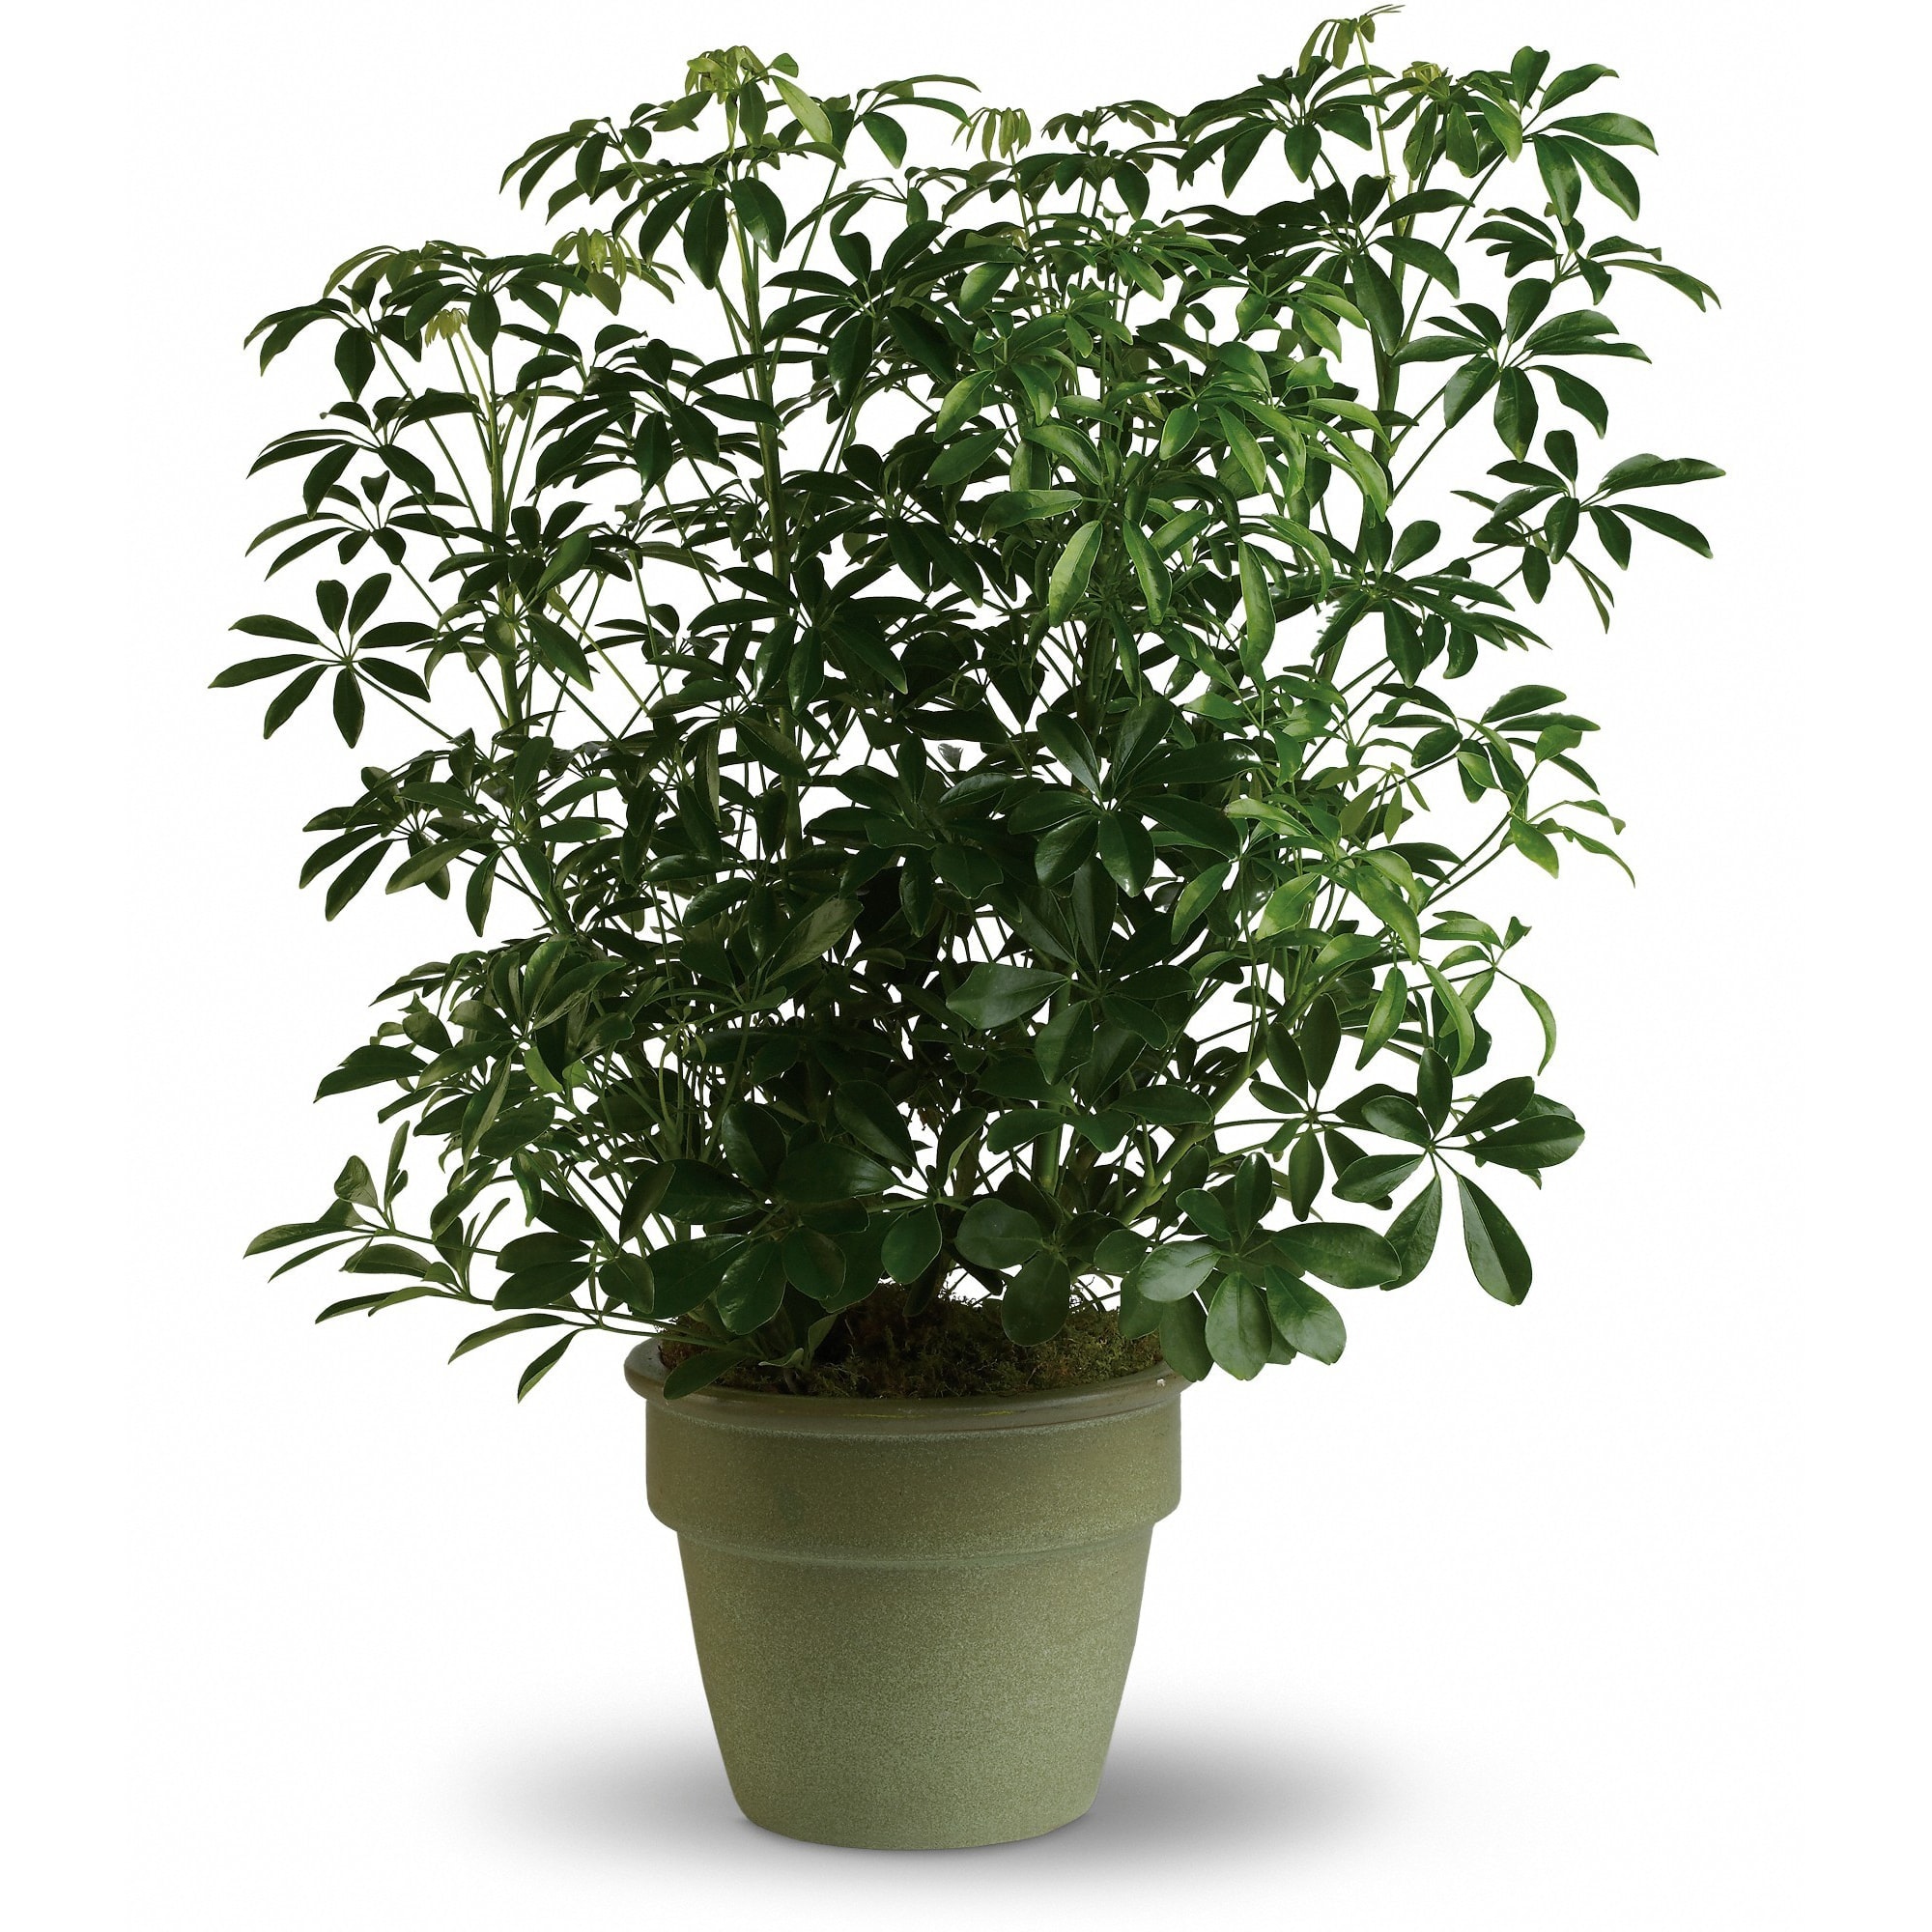 Amazing Arboricola  - Also known as the umbrella plant due to its lovely arching leafy branches, this is an amazing gift. It can last for years and lend its graceful beauty to any home or office.    Standing almost three feet tall in its olive green ceramic planter, this arboricola is a natural.    Approximately 27&quot; W x 34 1/2&quot; H    Orientation: N/A        As Shown : T104-3A    